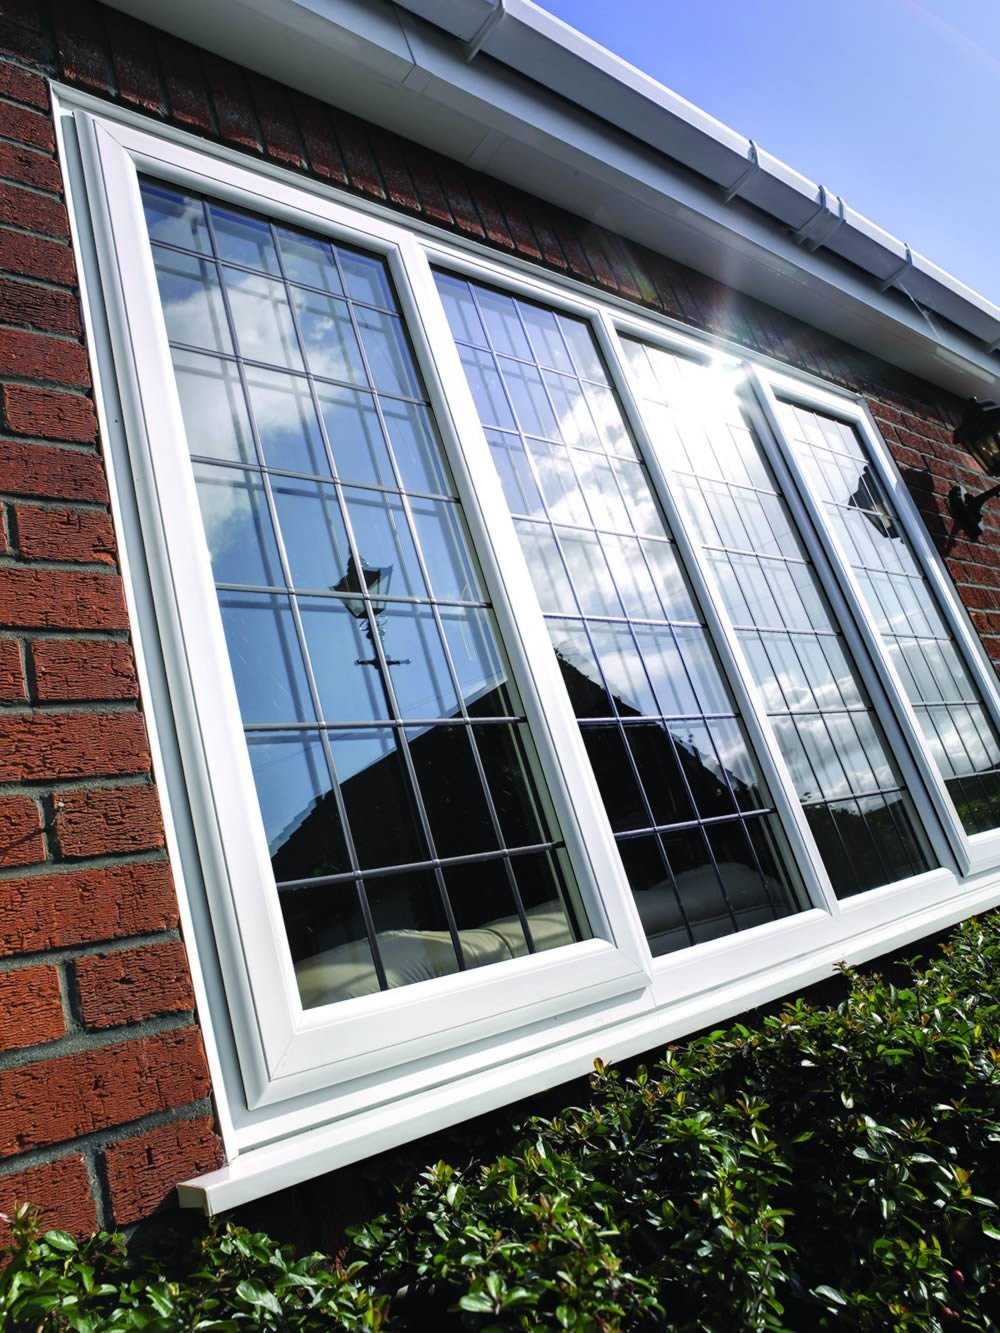 What makes double glazing windows a valuable investment?